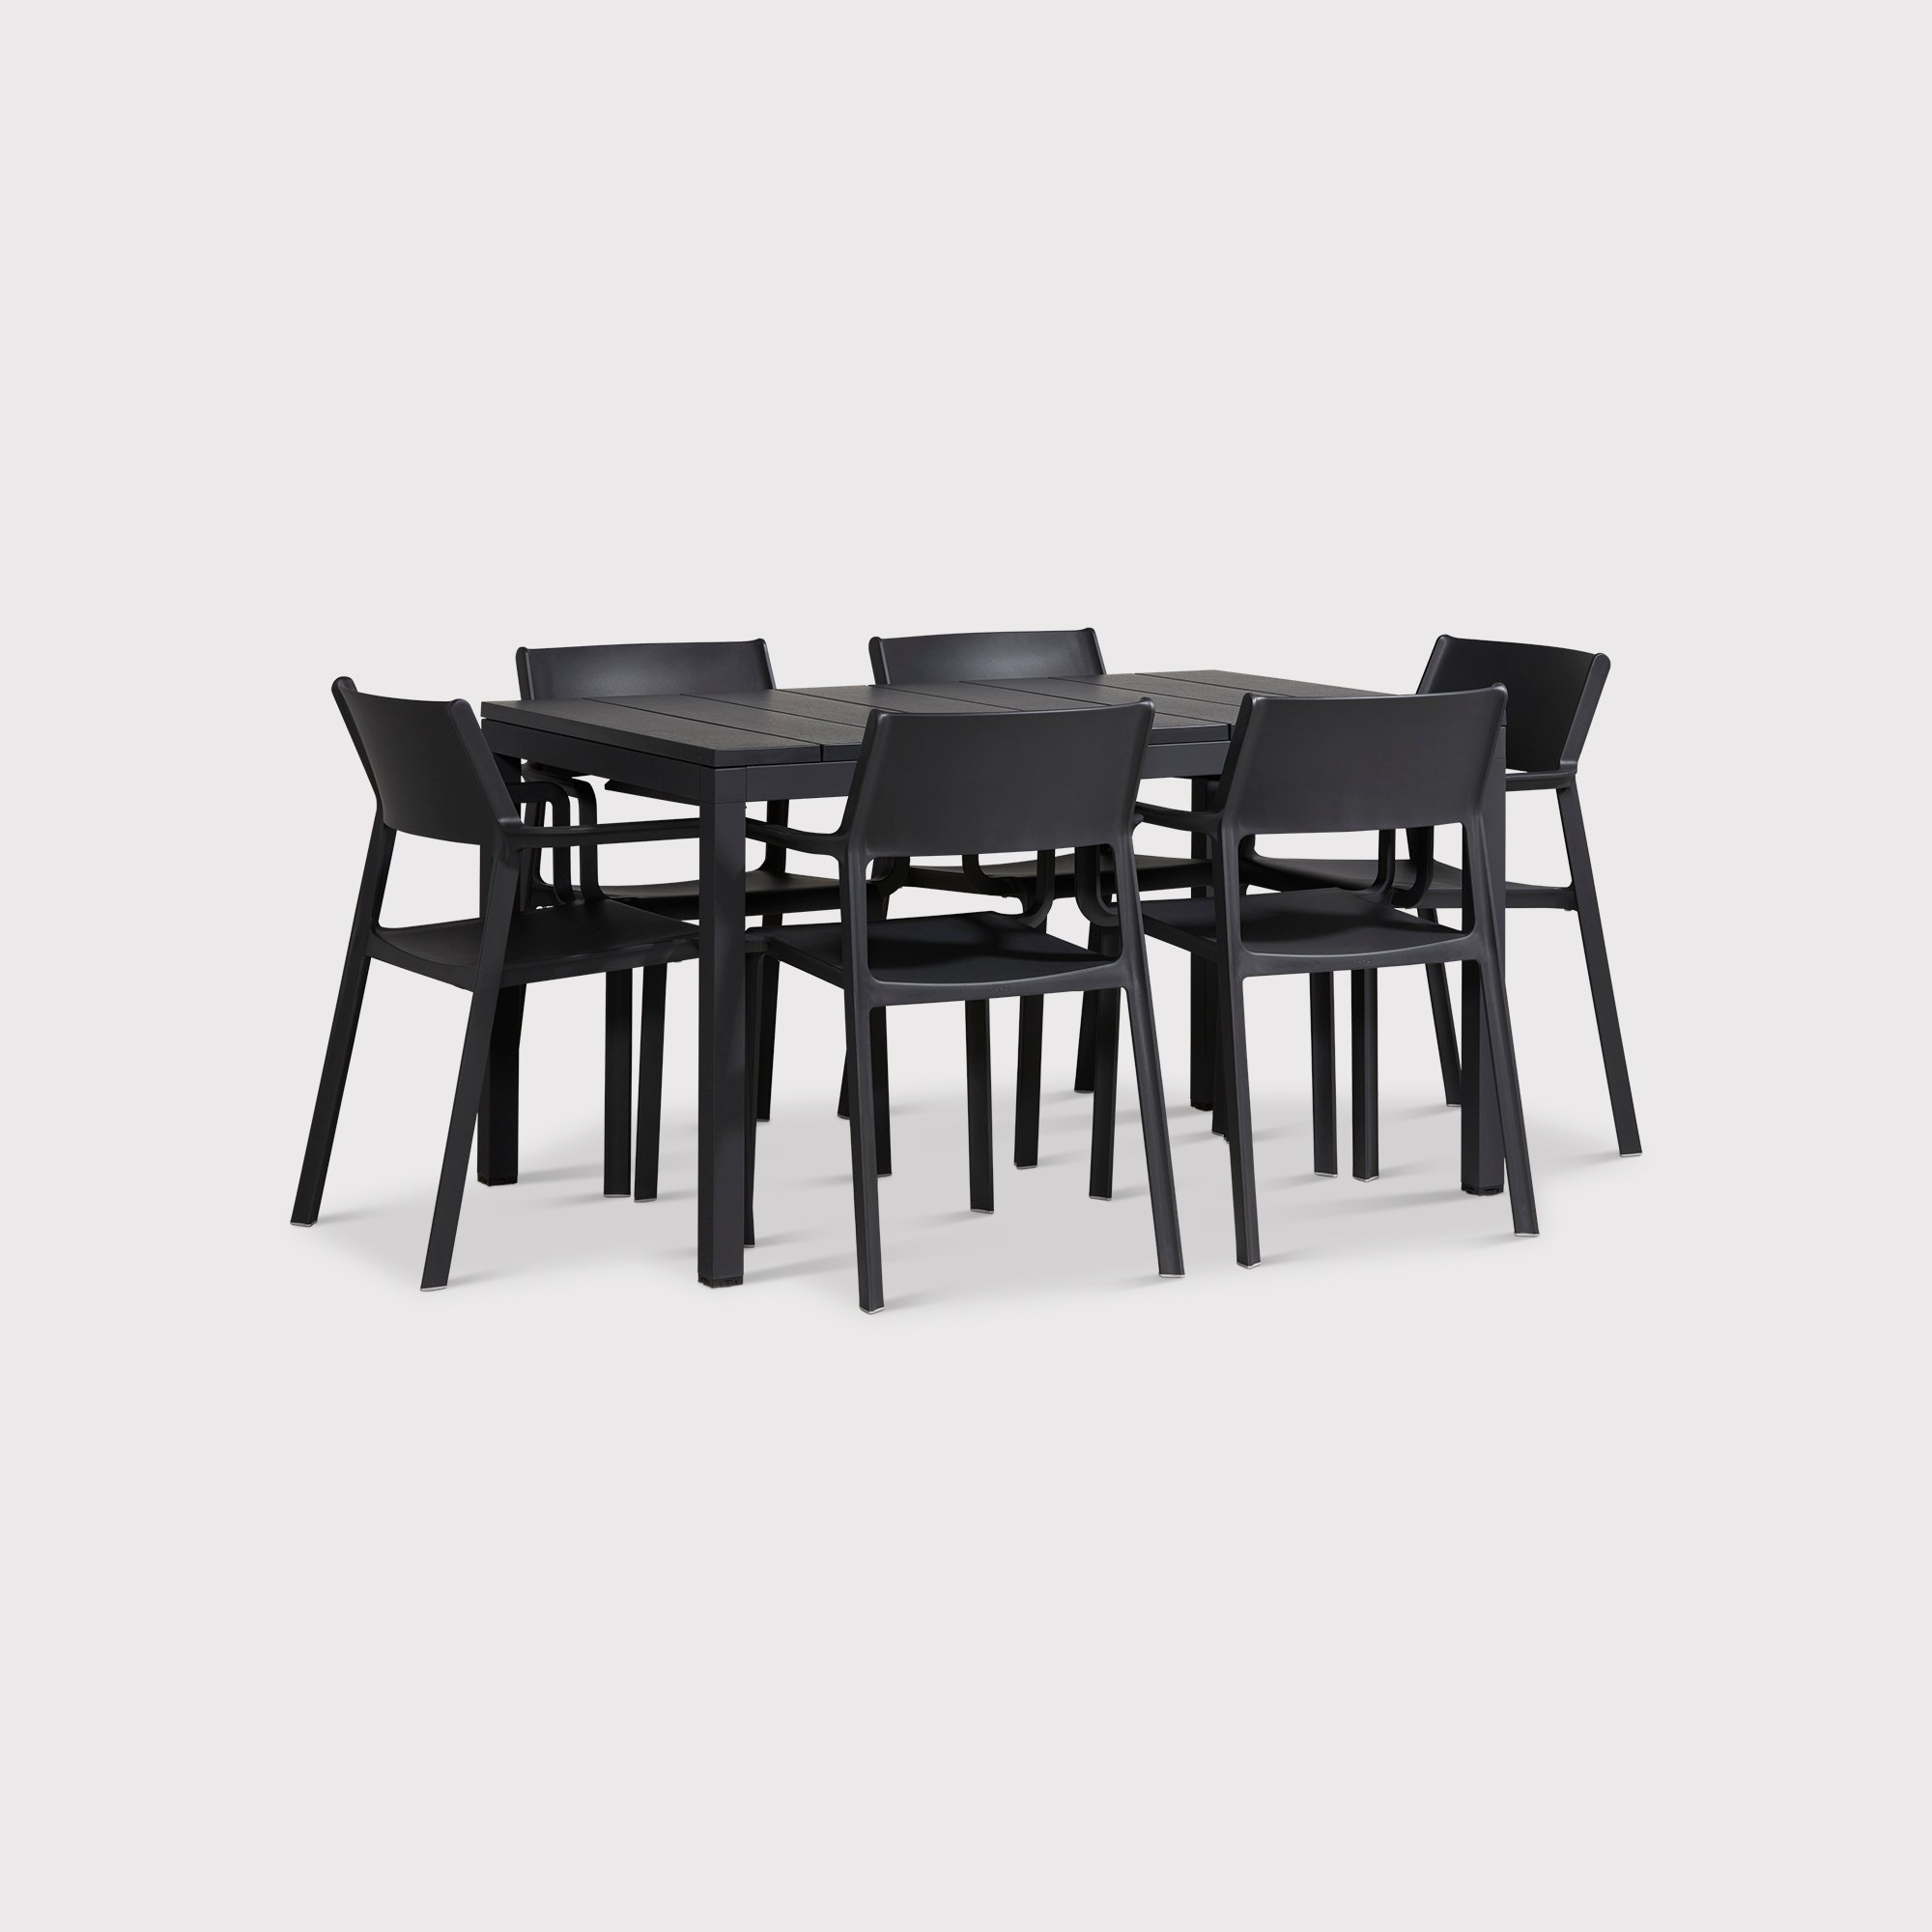 Varuna Table with 6 Calisto Chairs, Grey | Barker & Stonehouse